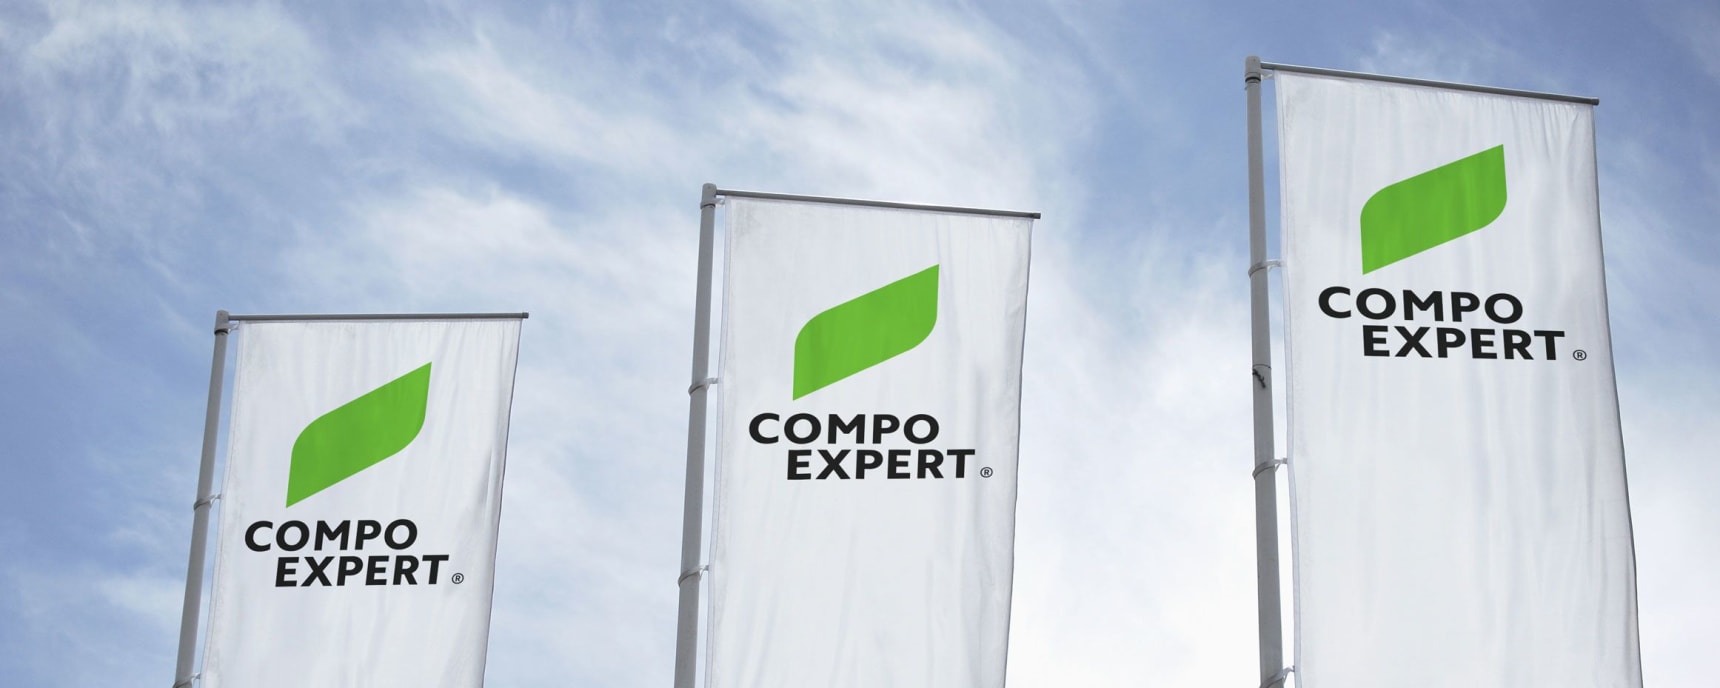 COMPO EXPERT South Africa banner